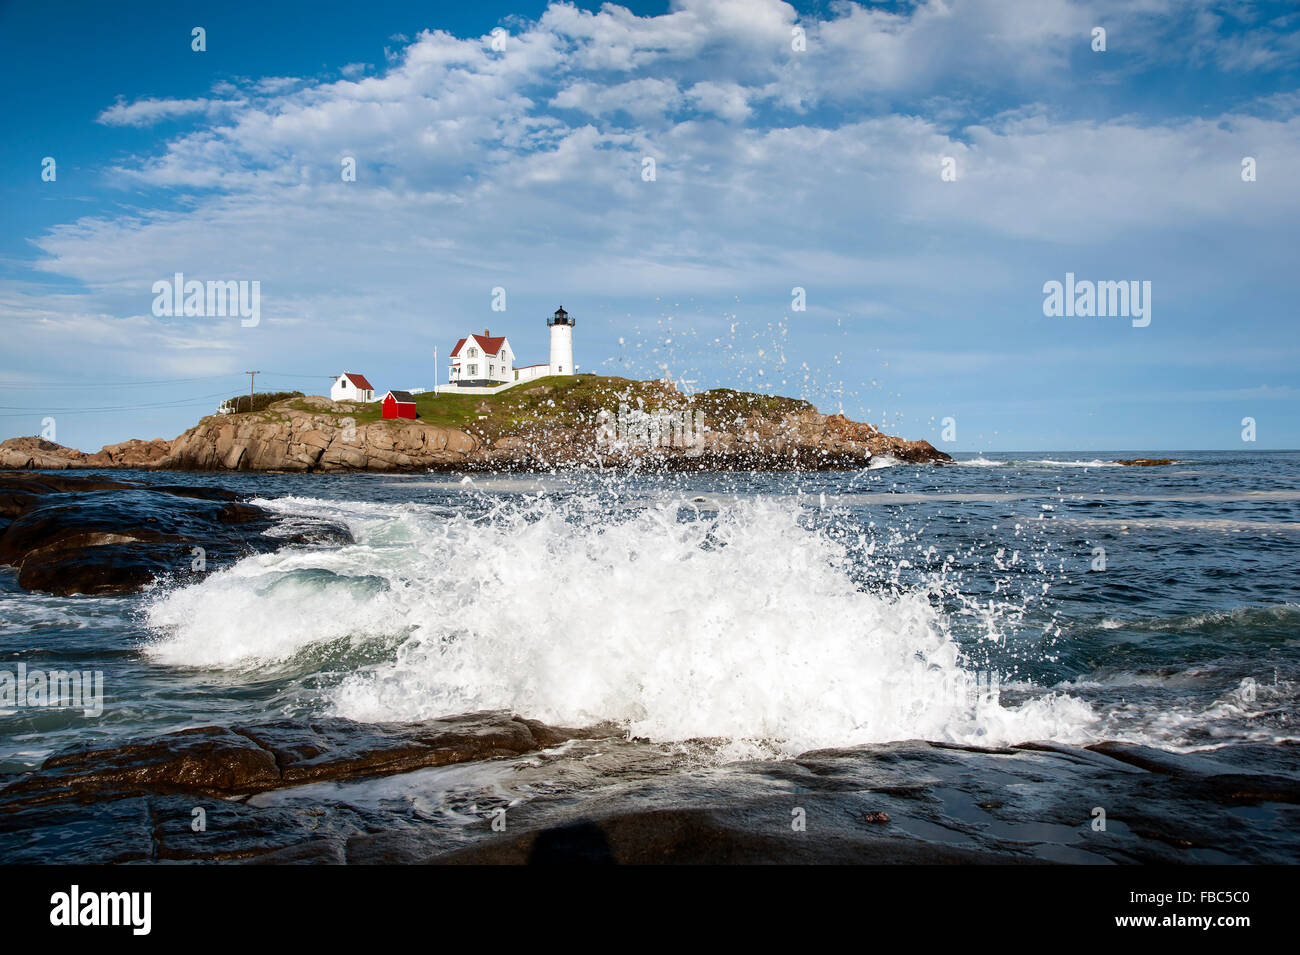 Waves crashing on rocks by Nubble lighthouse in Maine. The waves seem to uniquely reflect the clouds above the beacon. Stock Photo